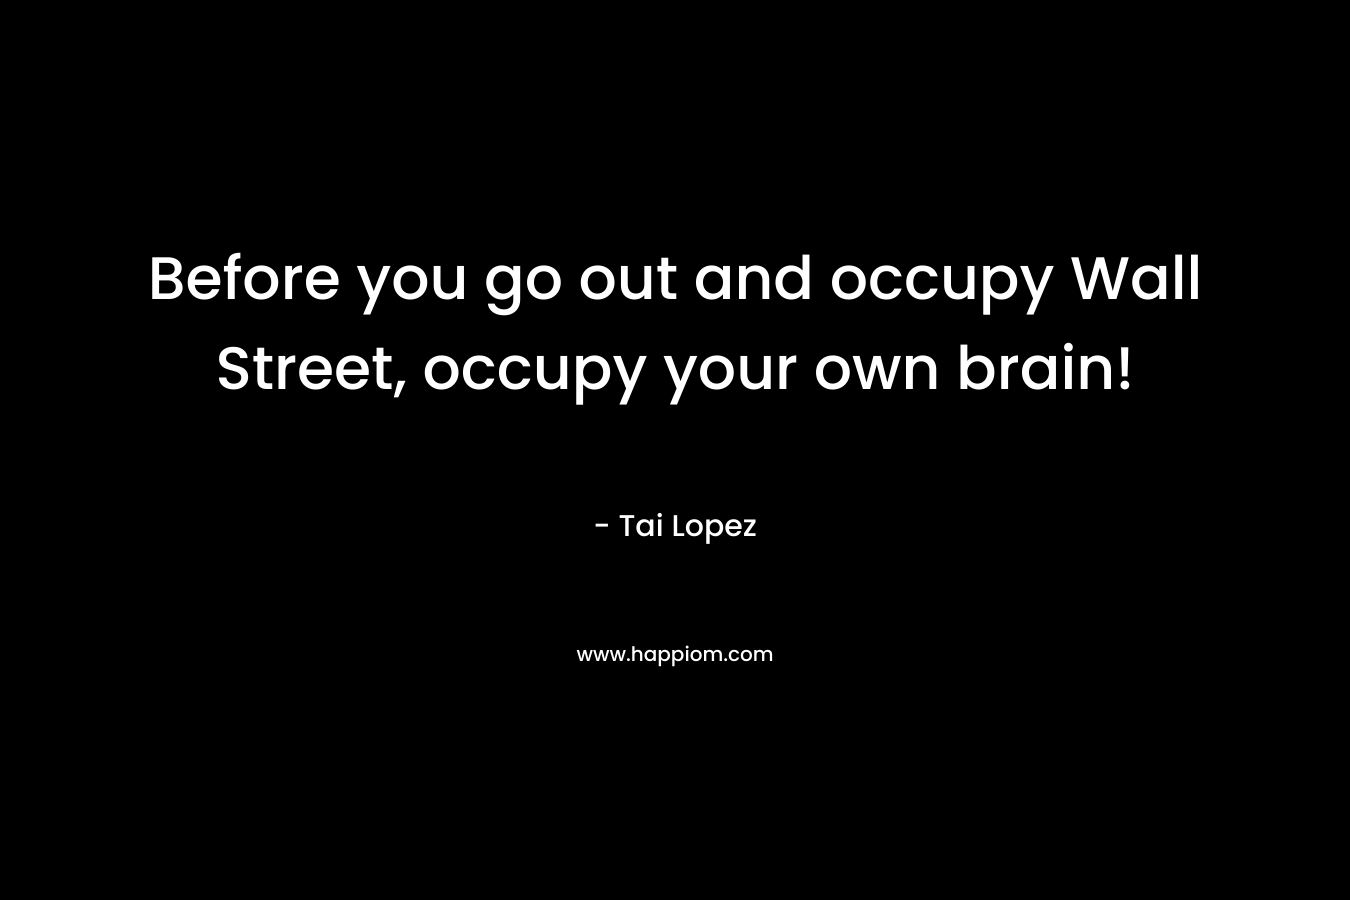 Before you go out and occupy Wall Street, occupy your own brain! – Tai Lopez